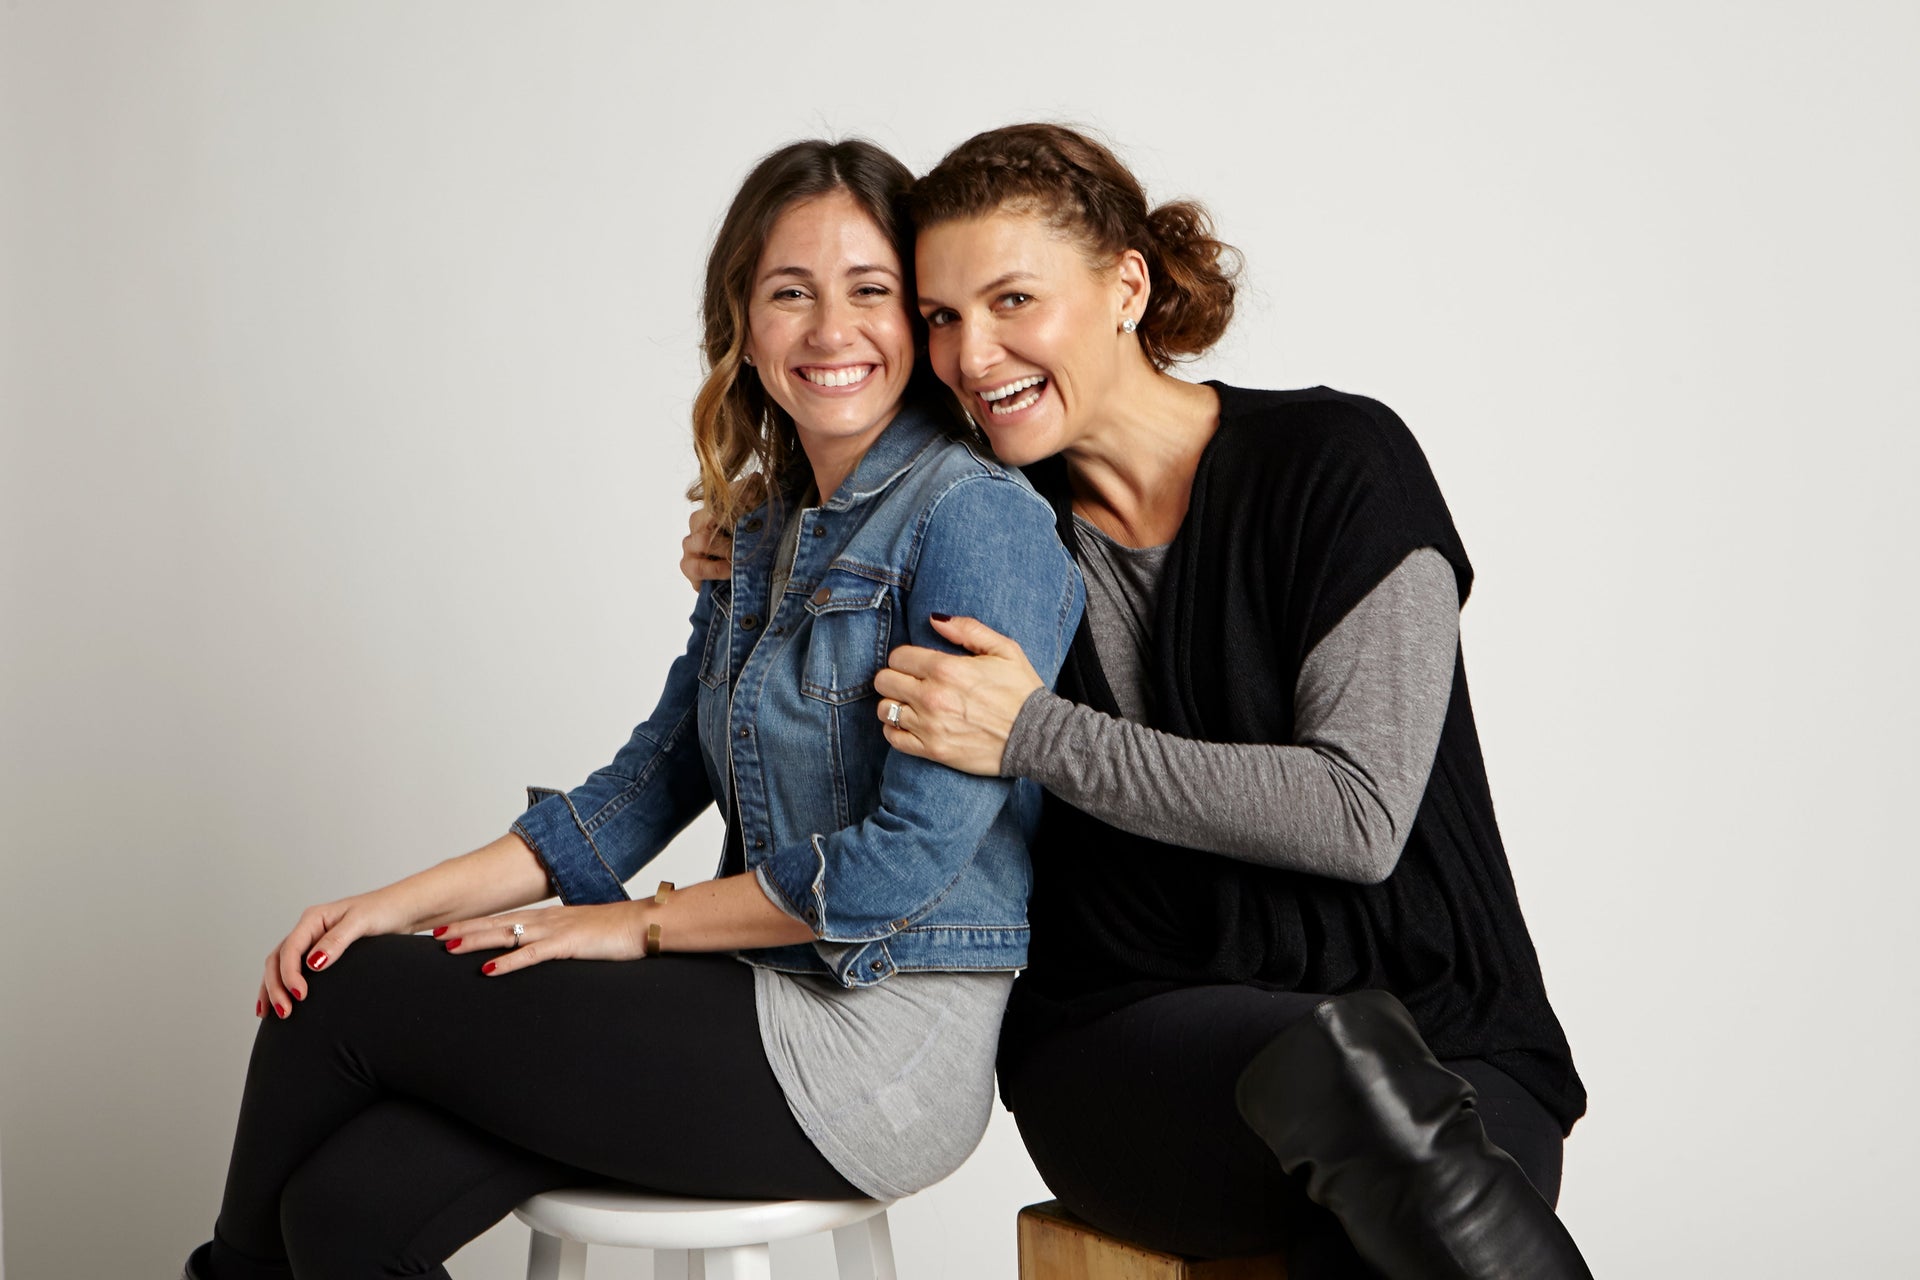 Our Founders – Beyond Yoga